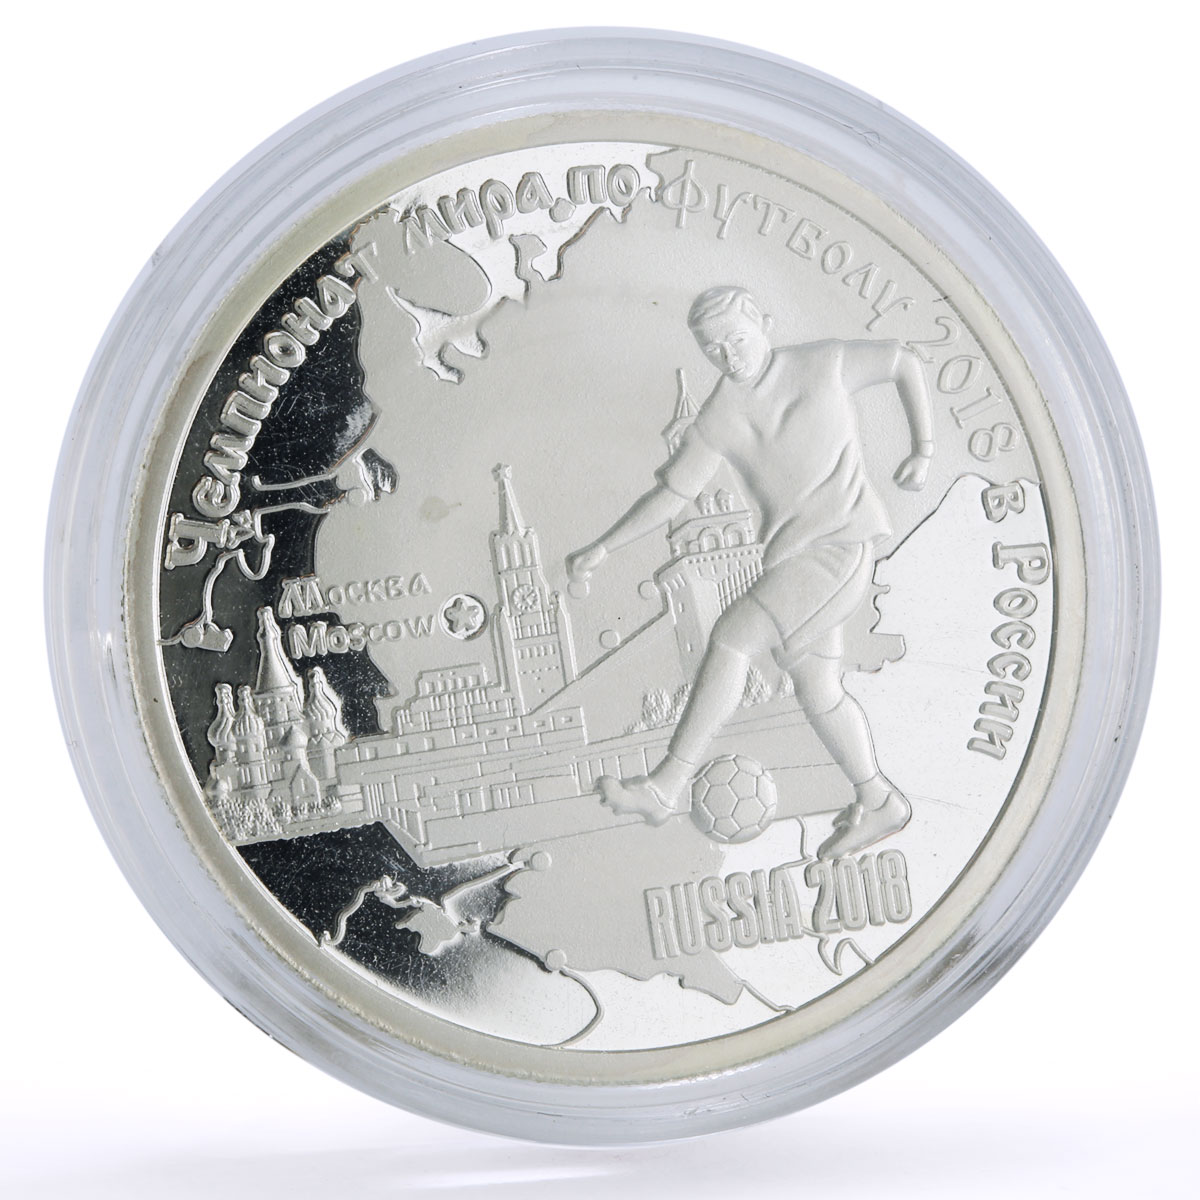 Cameroon 1000 francs World Cup Football 2018 Moscow proof silver coin 2017